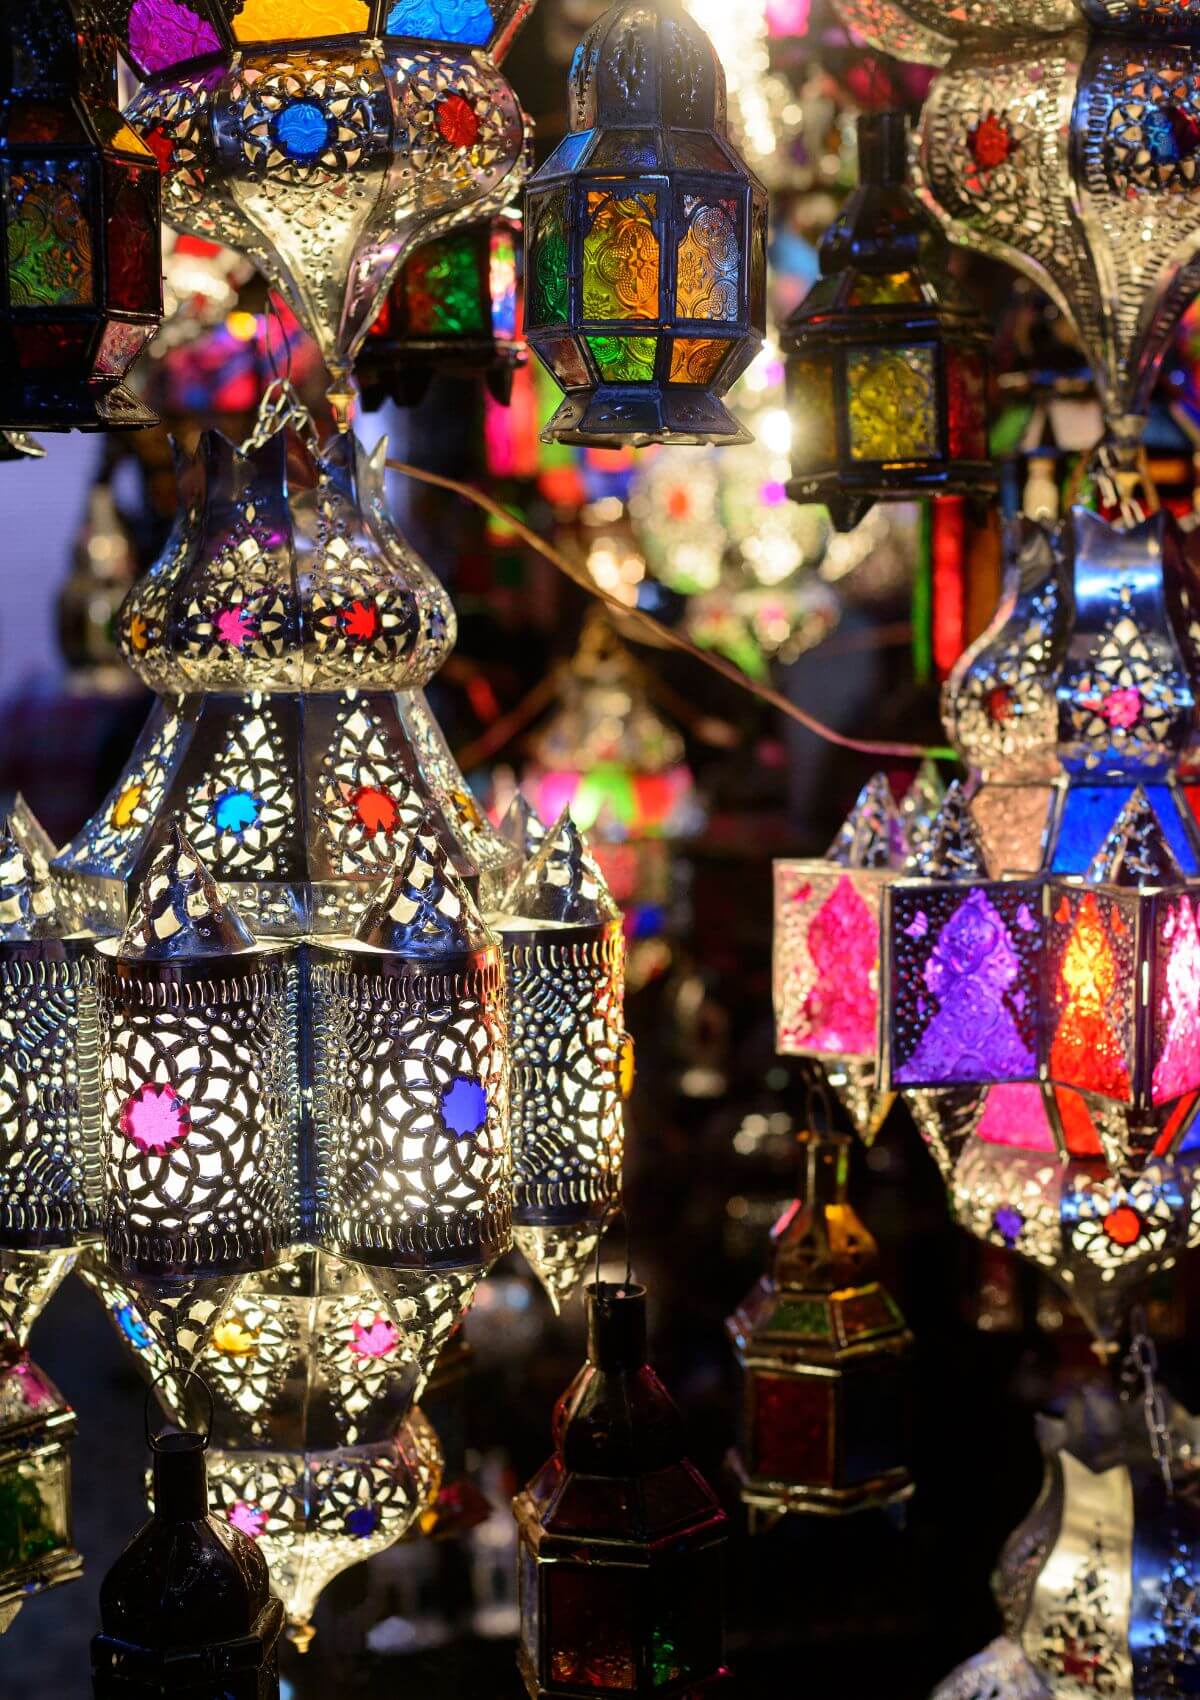 10 Best Souvenirs from Morocco to Remember Your Trip By